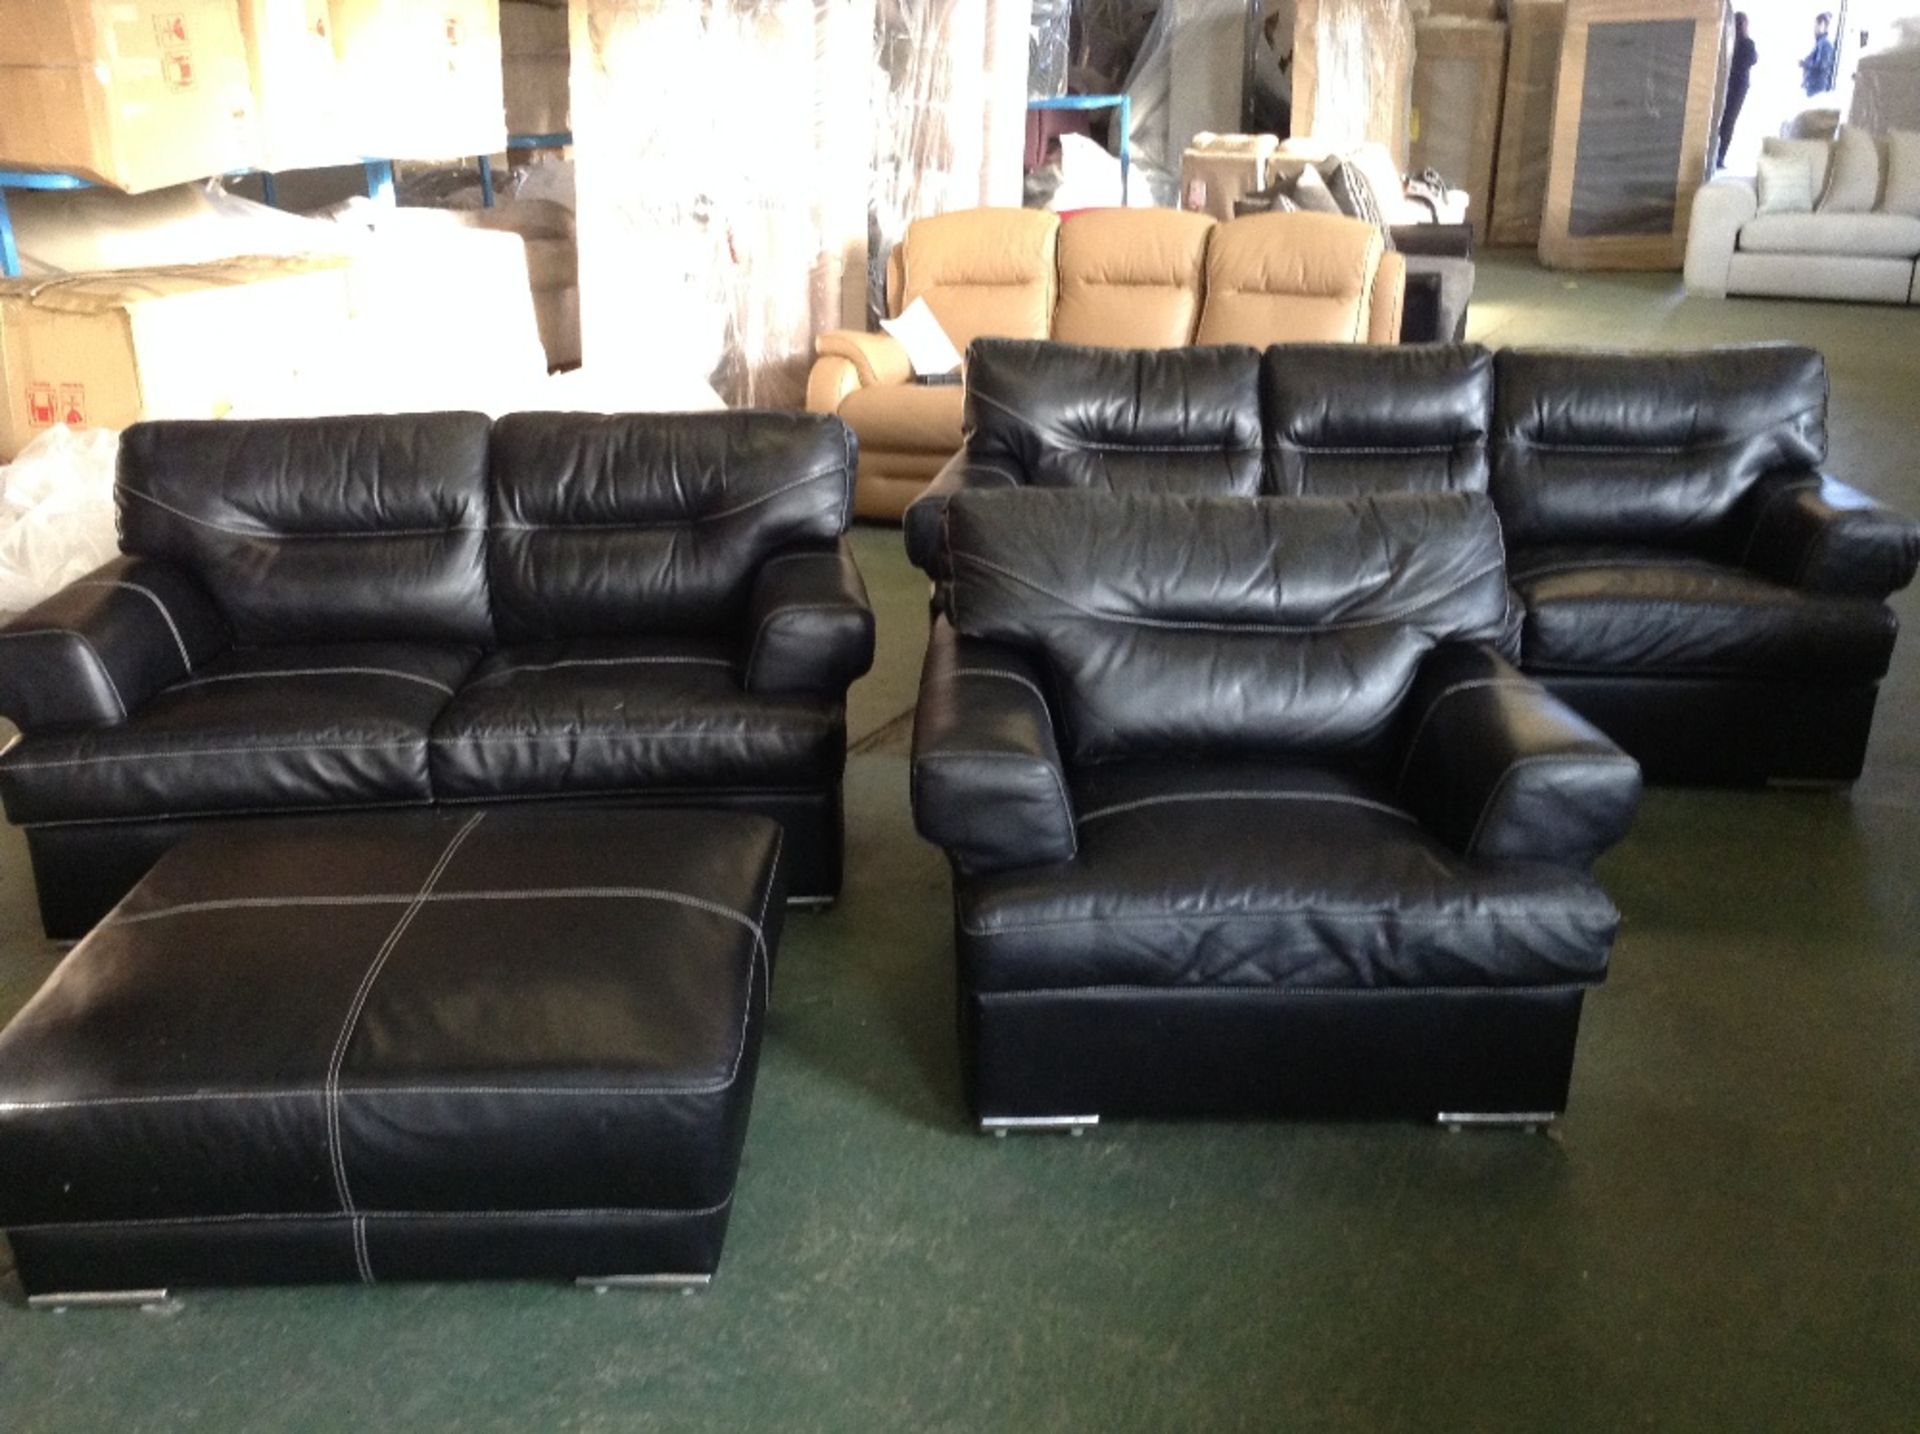 BLACK LEATHER WITH WHITE STITCH 3 SEATER SOFA, 2 S